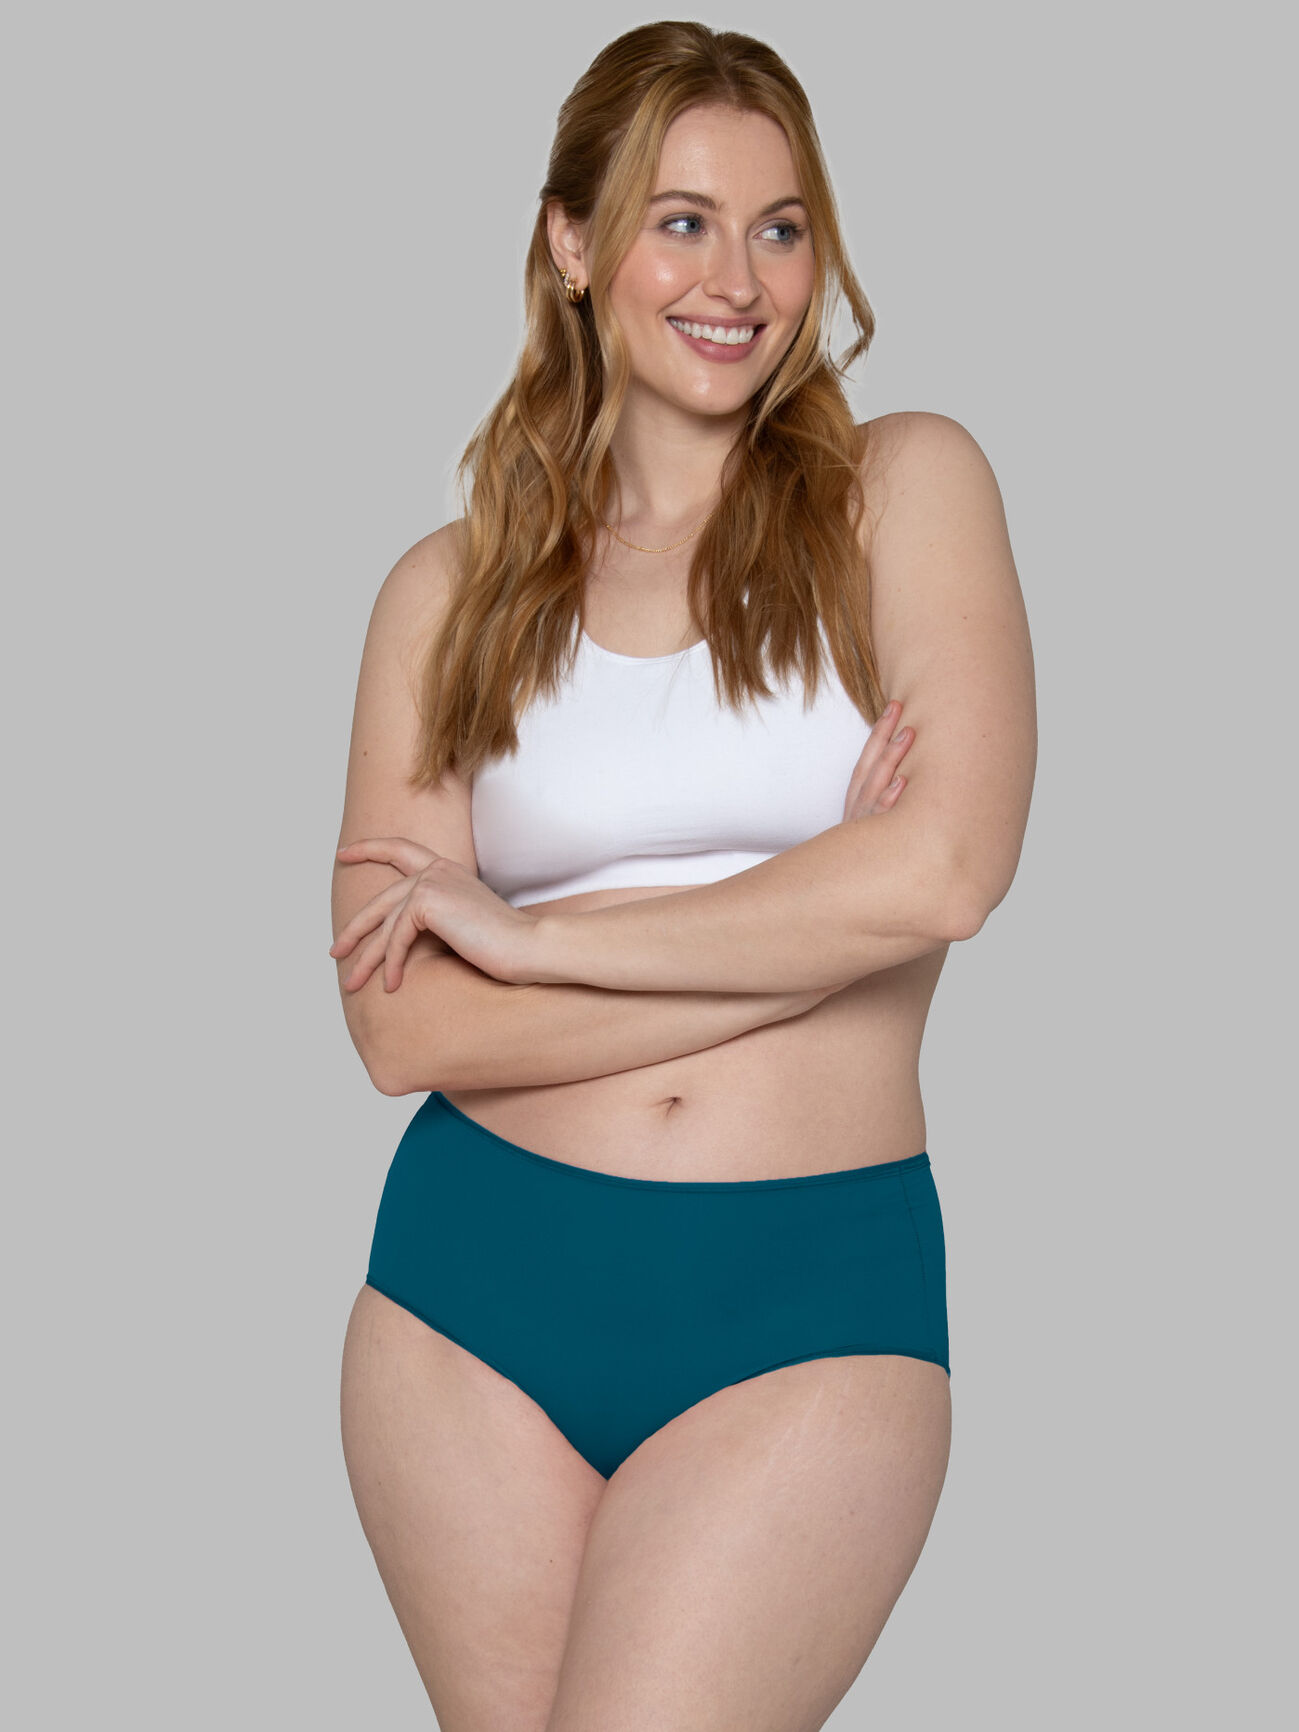 Buy Just My Size Women's Plus Size Fresh & Dry Briefs 3-Pack, Assorted, 9  at